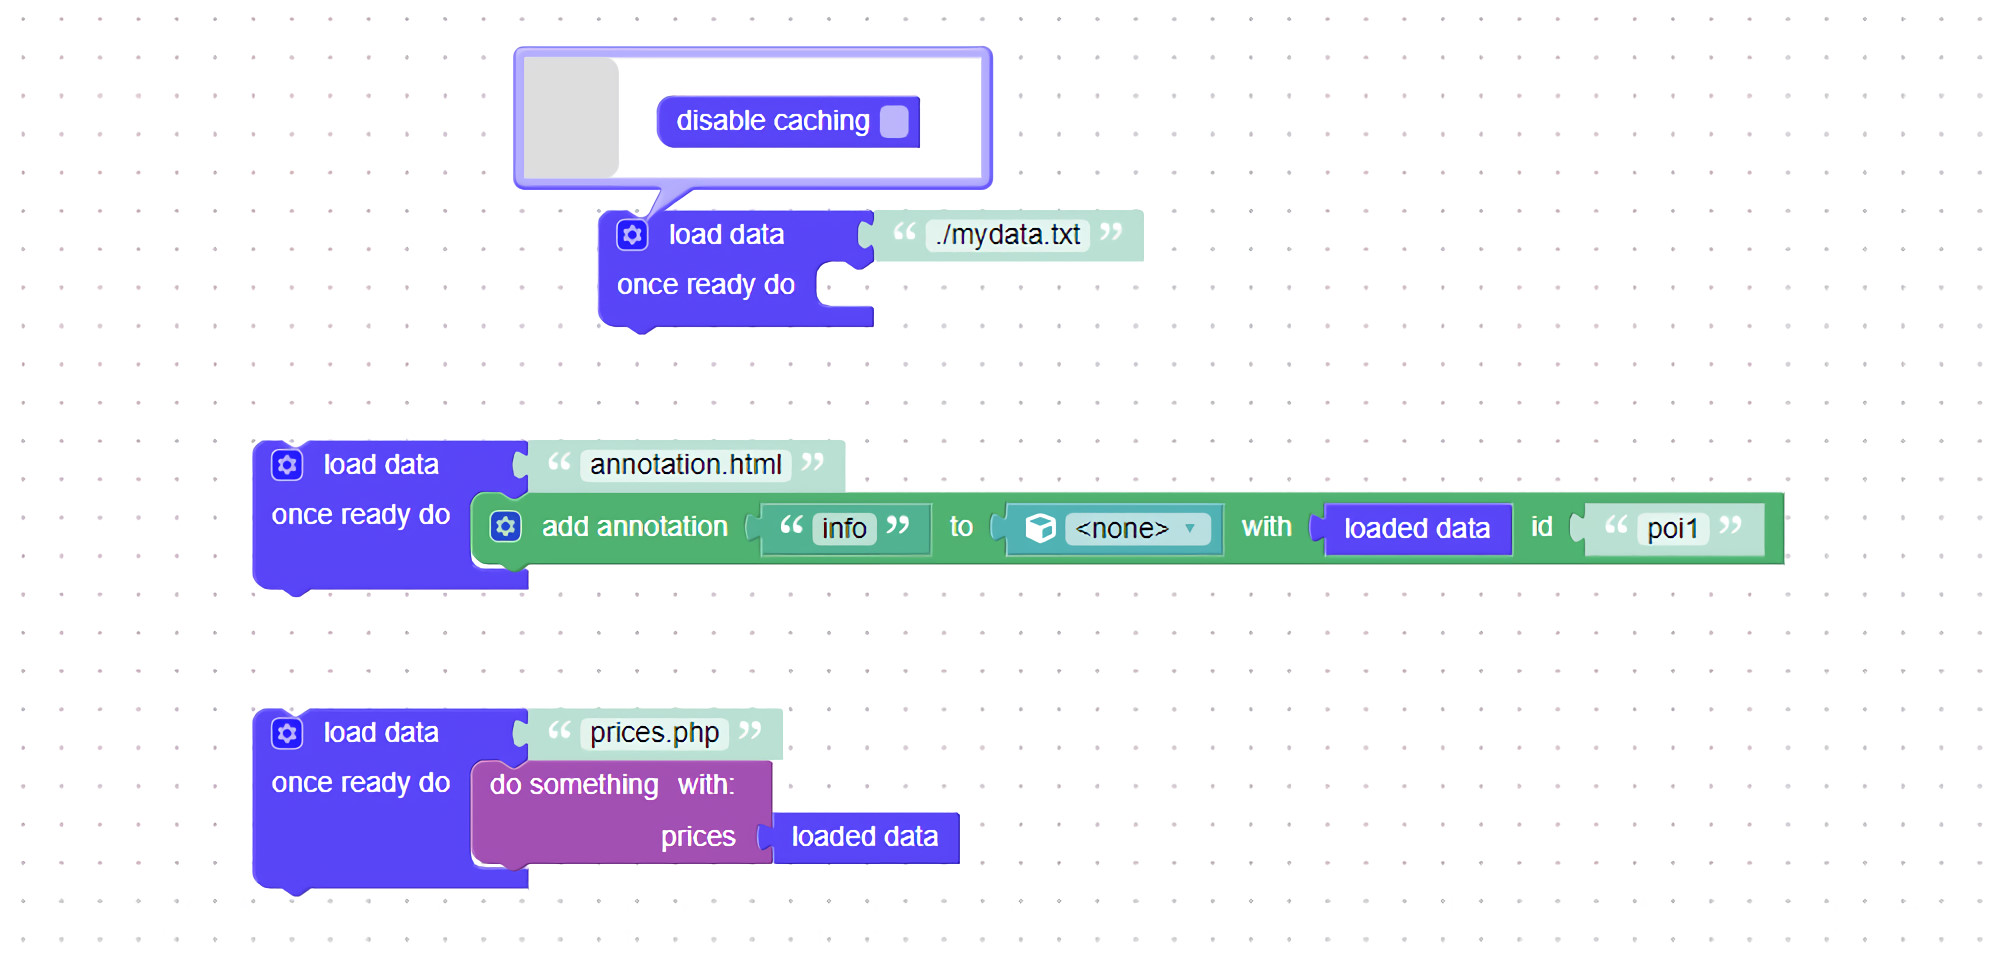 Visual programming block to get data over network